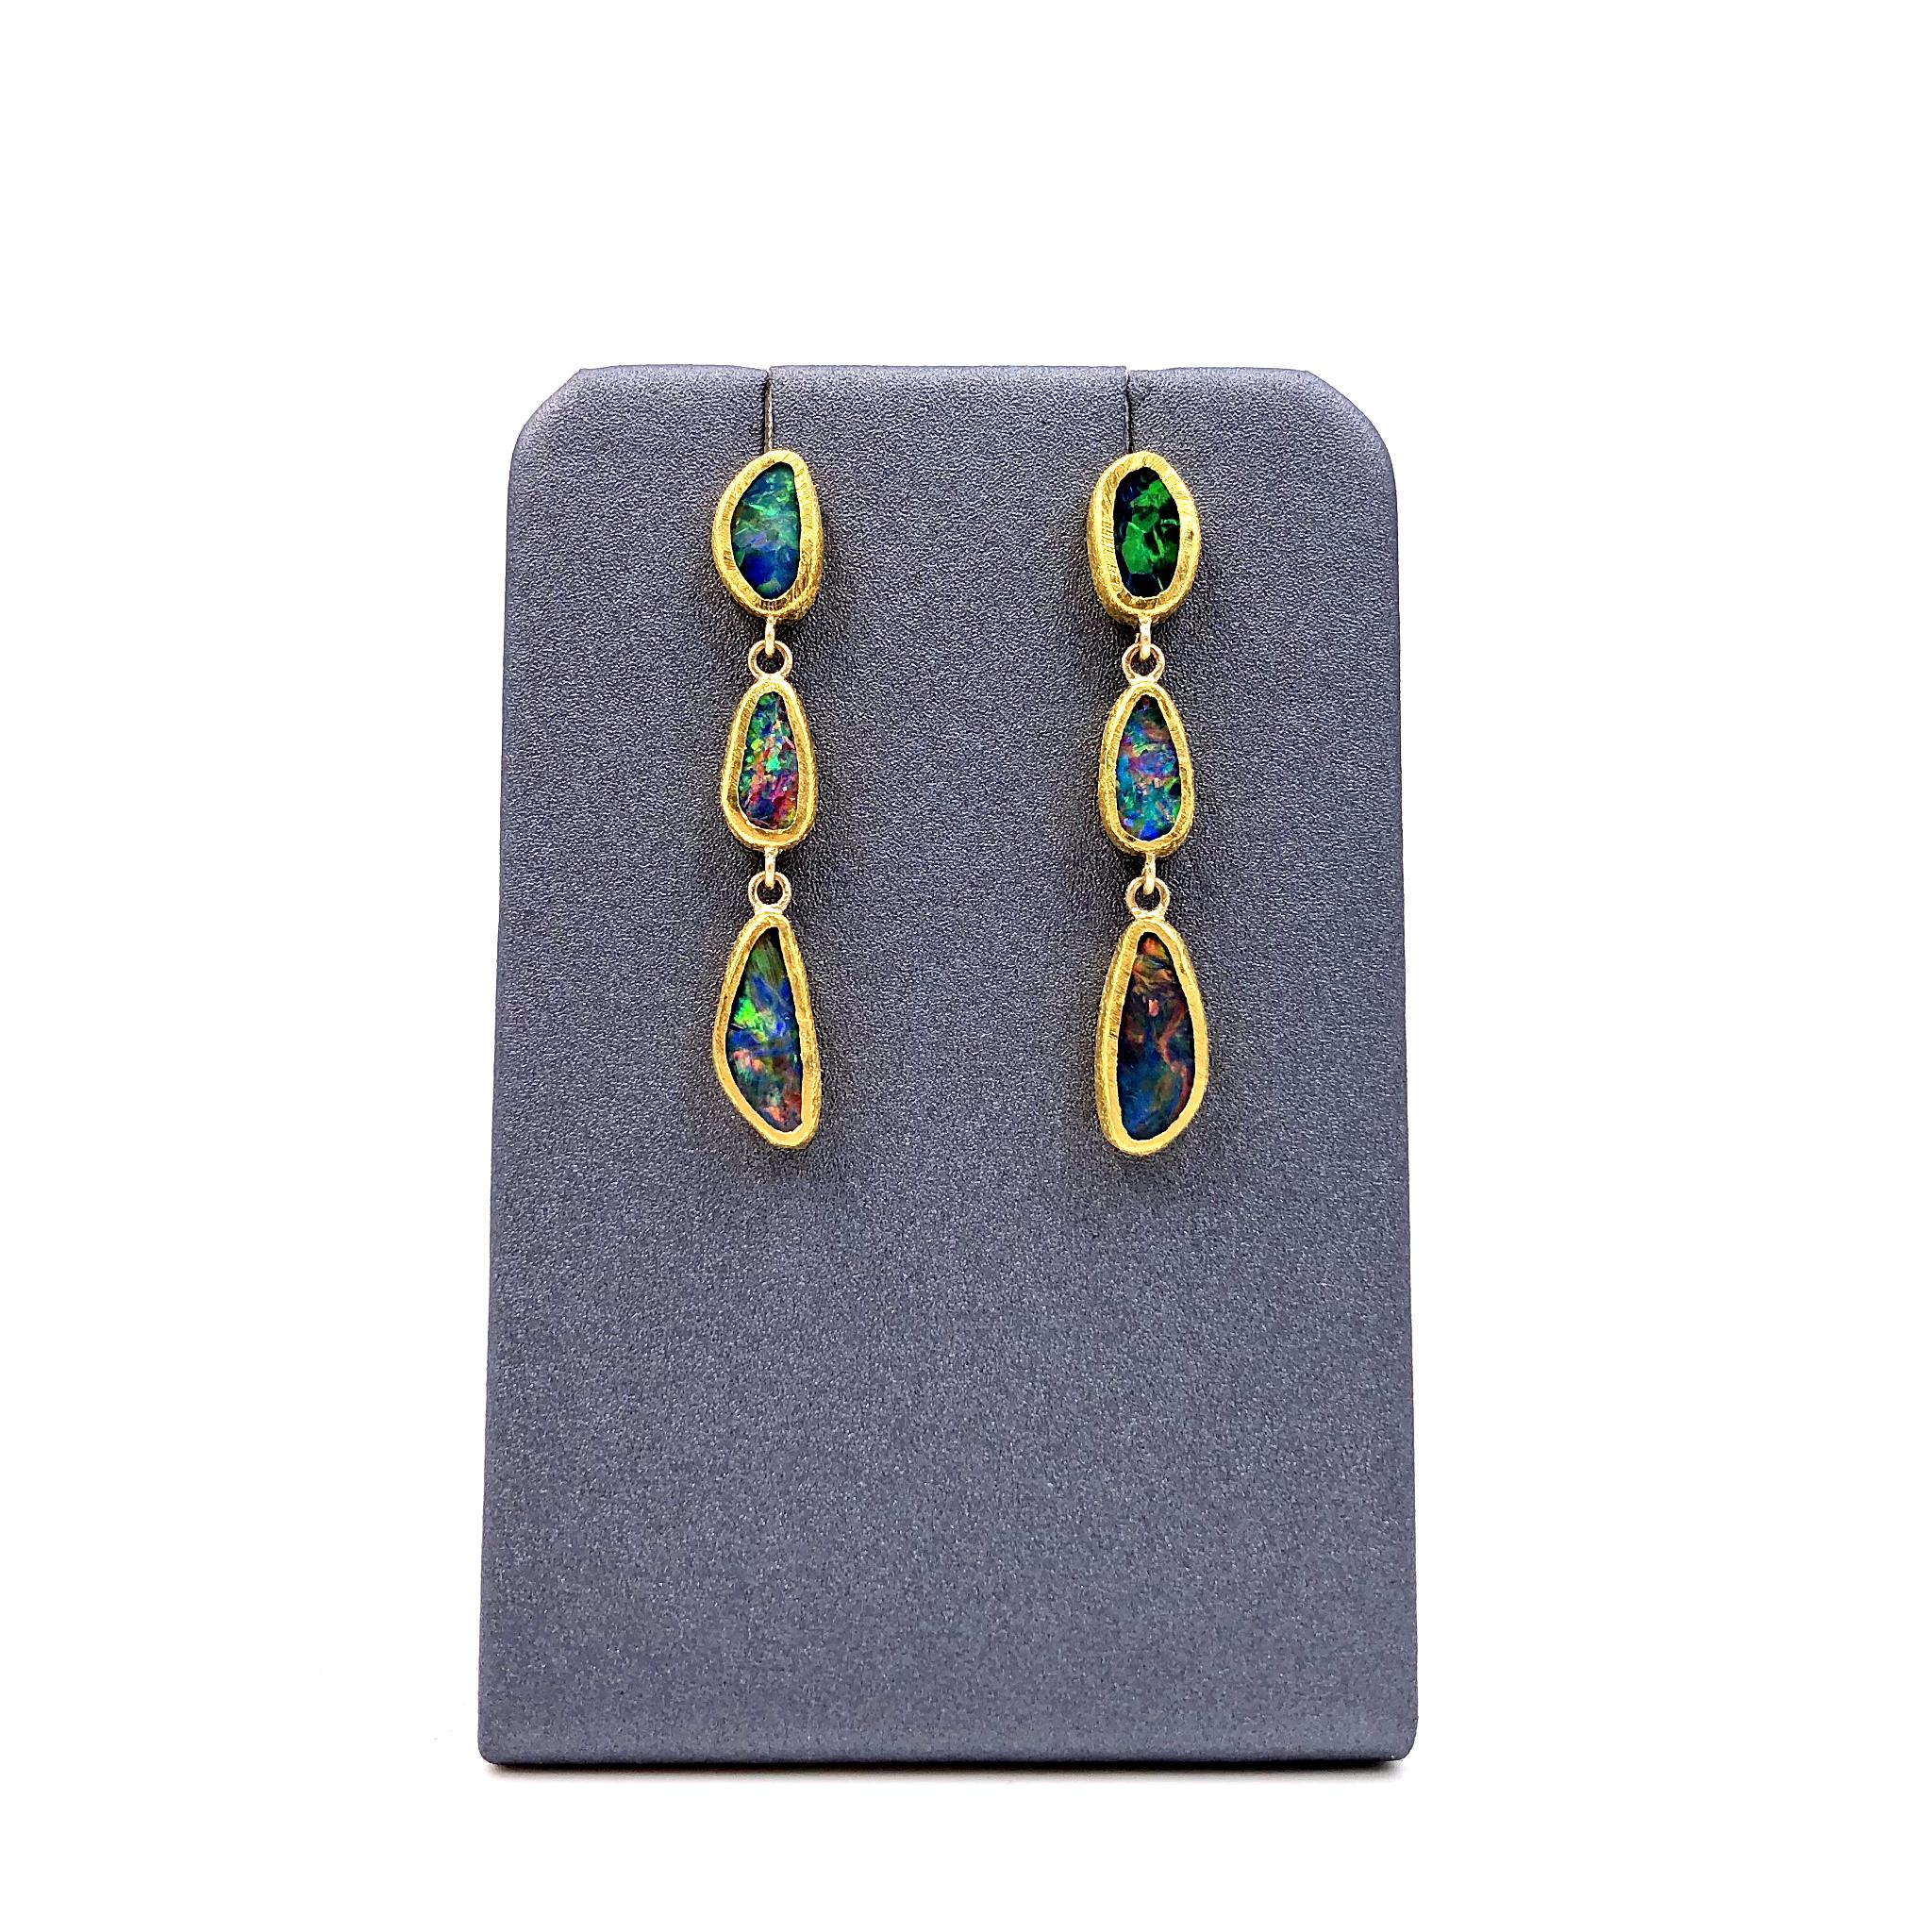 One of a Kind Drop Earrings handcrafted by acclaimed jewelry maker Devta Doolan with six opal doublets exhibiting a vibrant multicolored confetti flash - electrifying red, green, orange, blue, yellow, violet, and purple fire. The opals are bezel-set